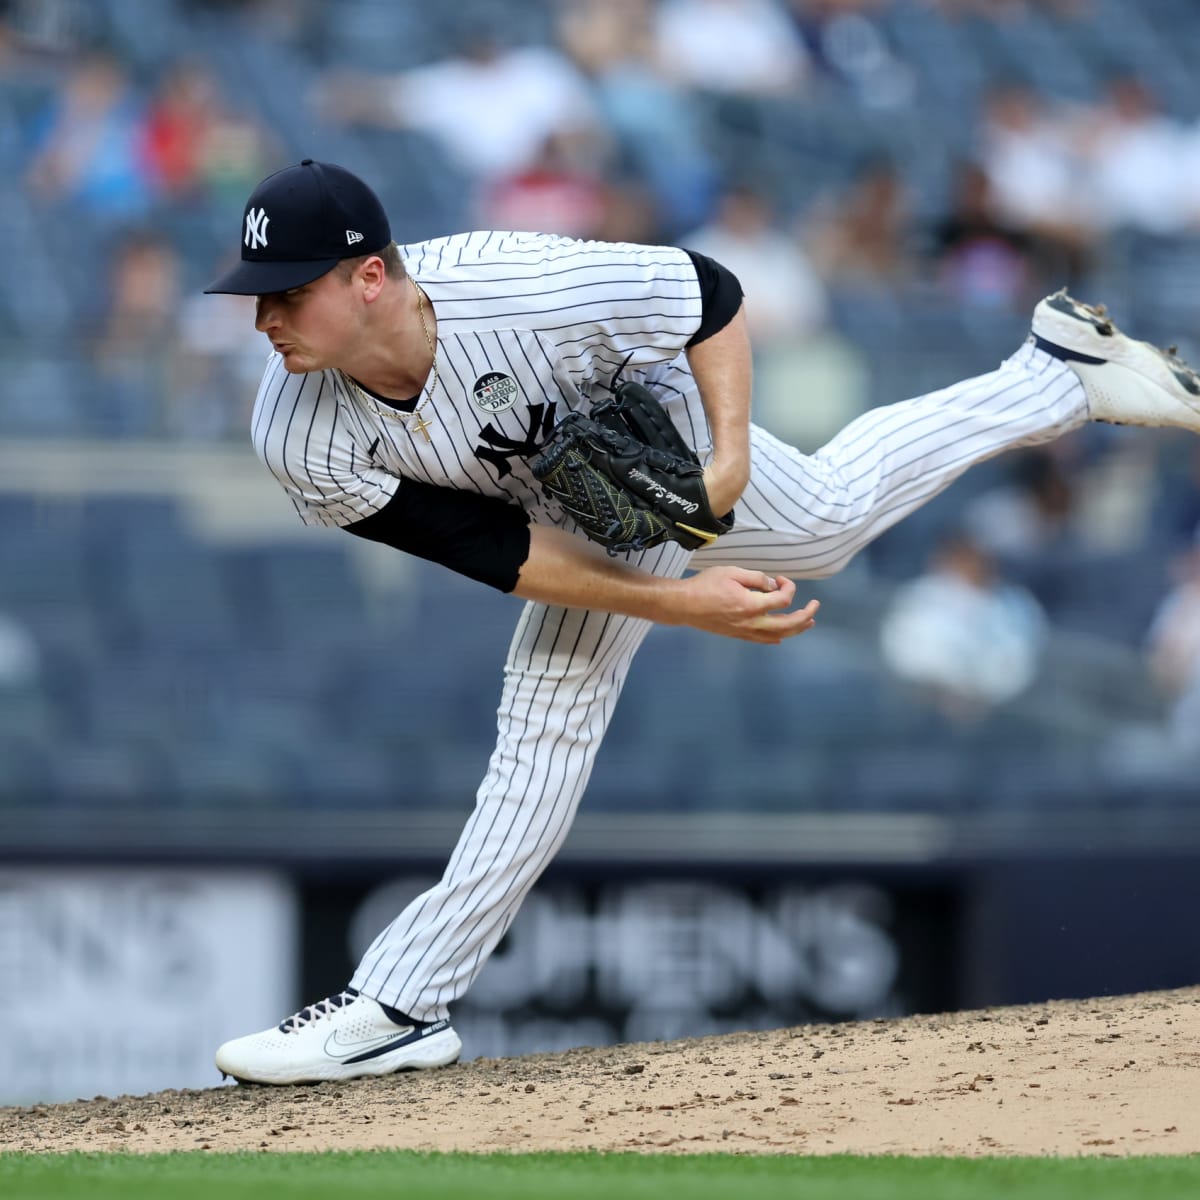 Clarke Schmidt has career-high pitch count outing in Yankees' loss